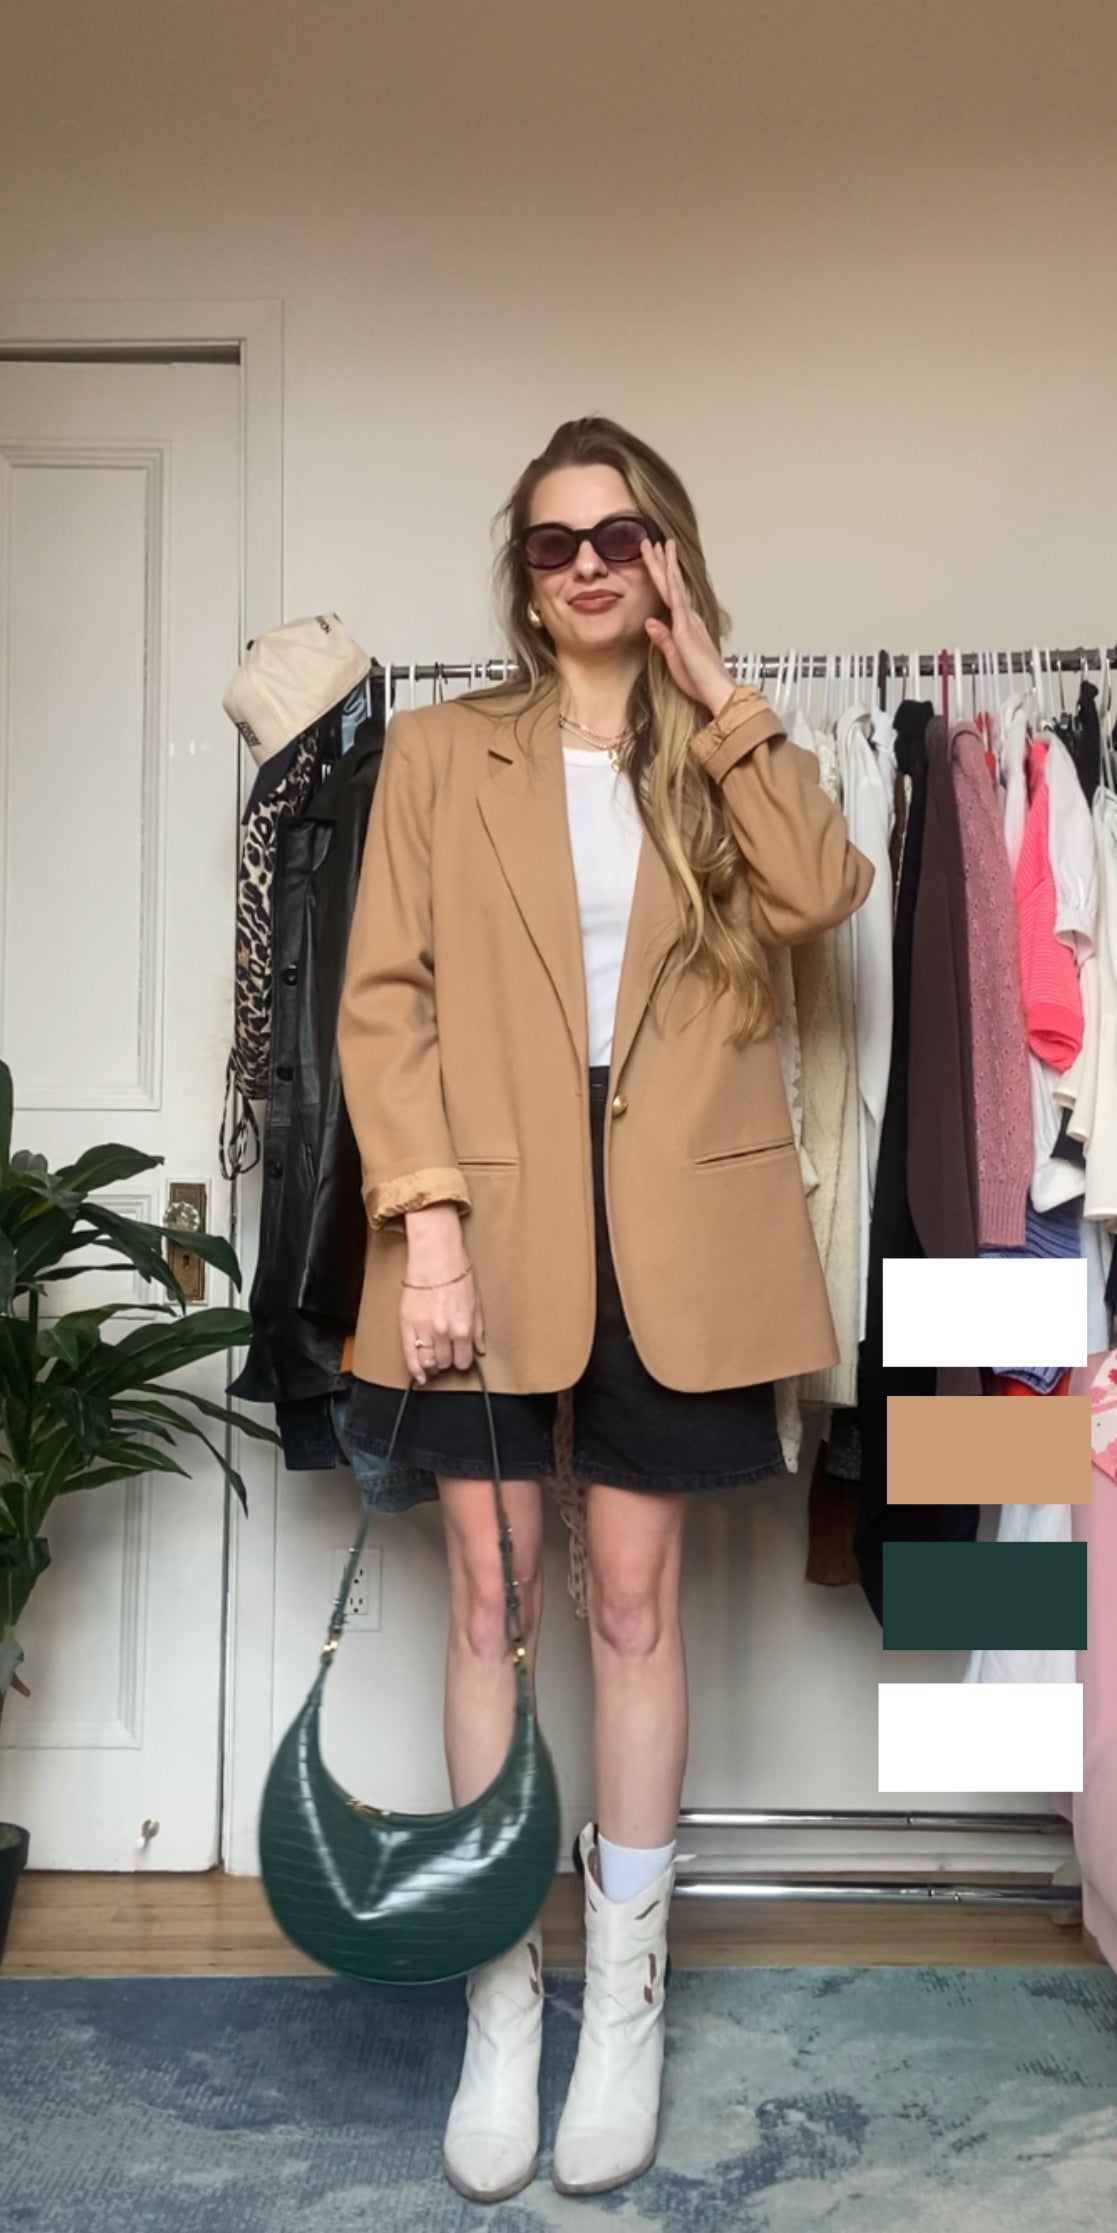 Woman in oversized blazer, mini skirt, and boots, holding purse, standing in a room with clothes rack